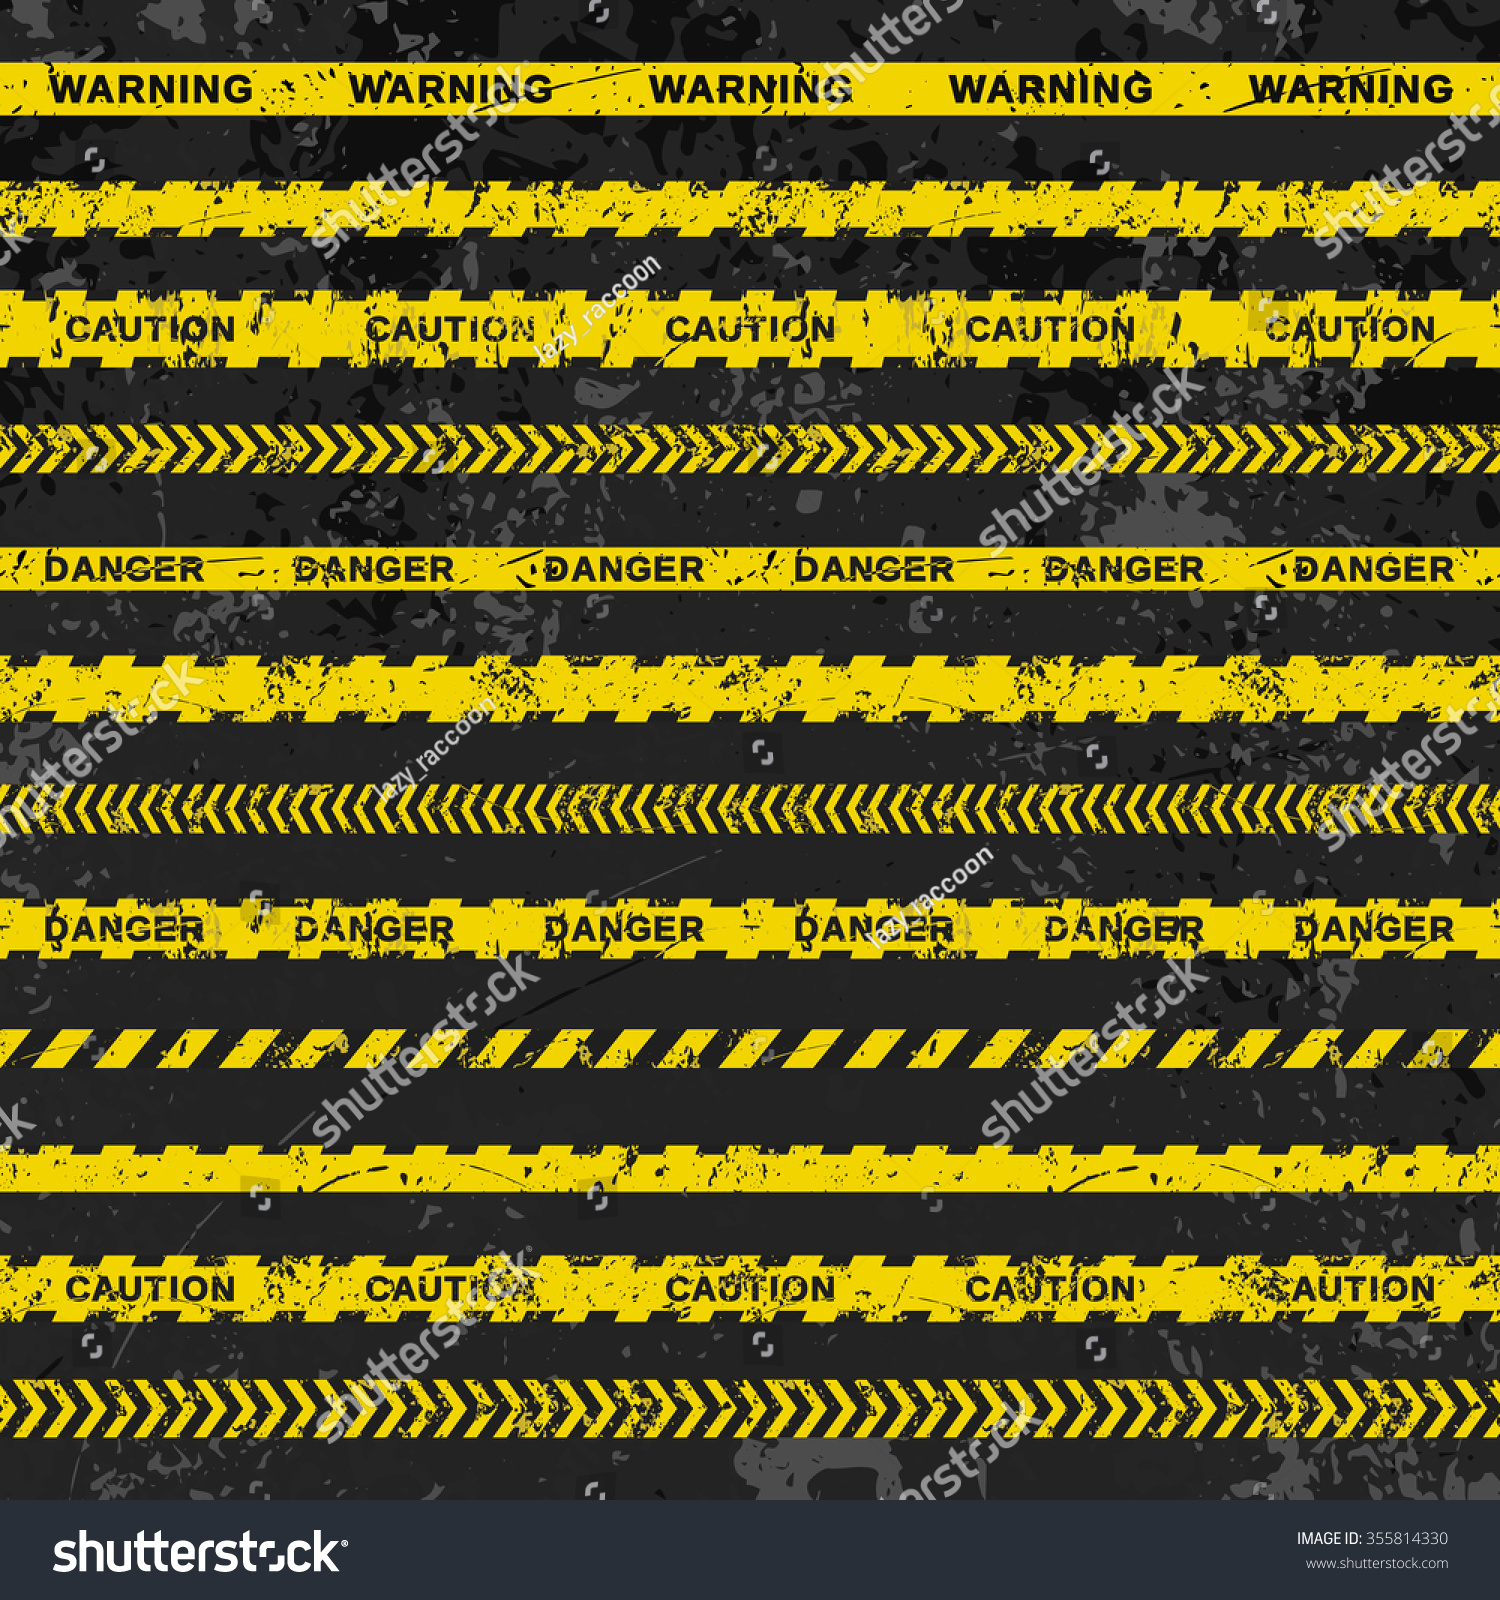 SVG of Grunge vector set of caution tapes on dark background. Illustration consists of 